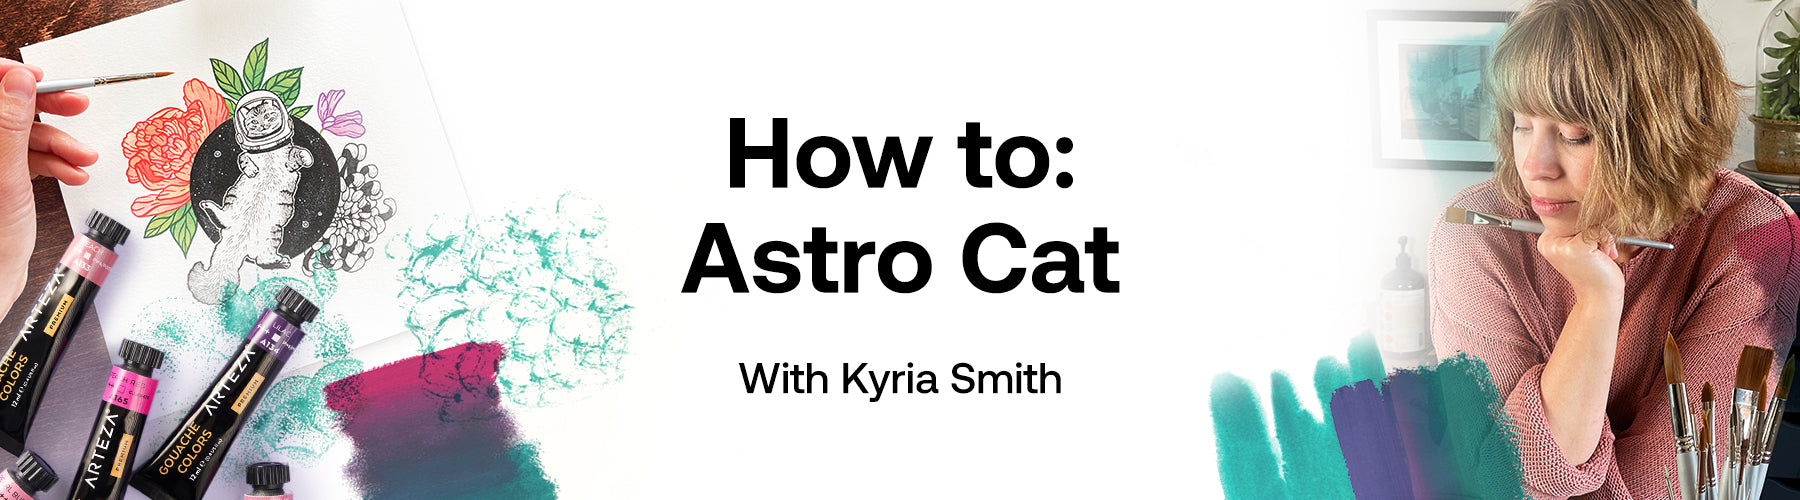 How to: Astro Cat with Kyria Smith –